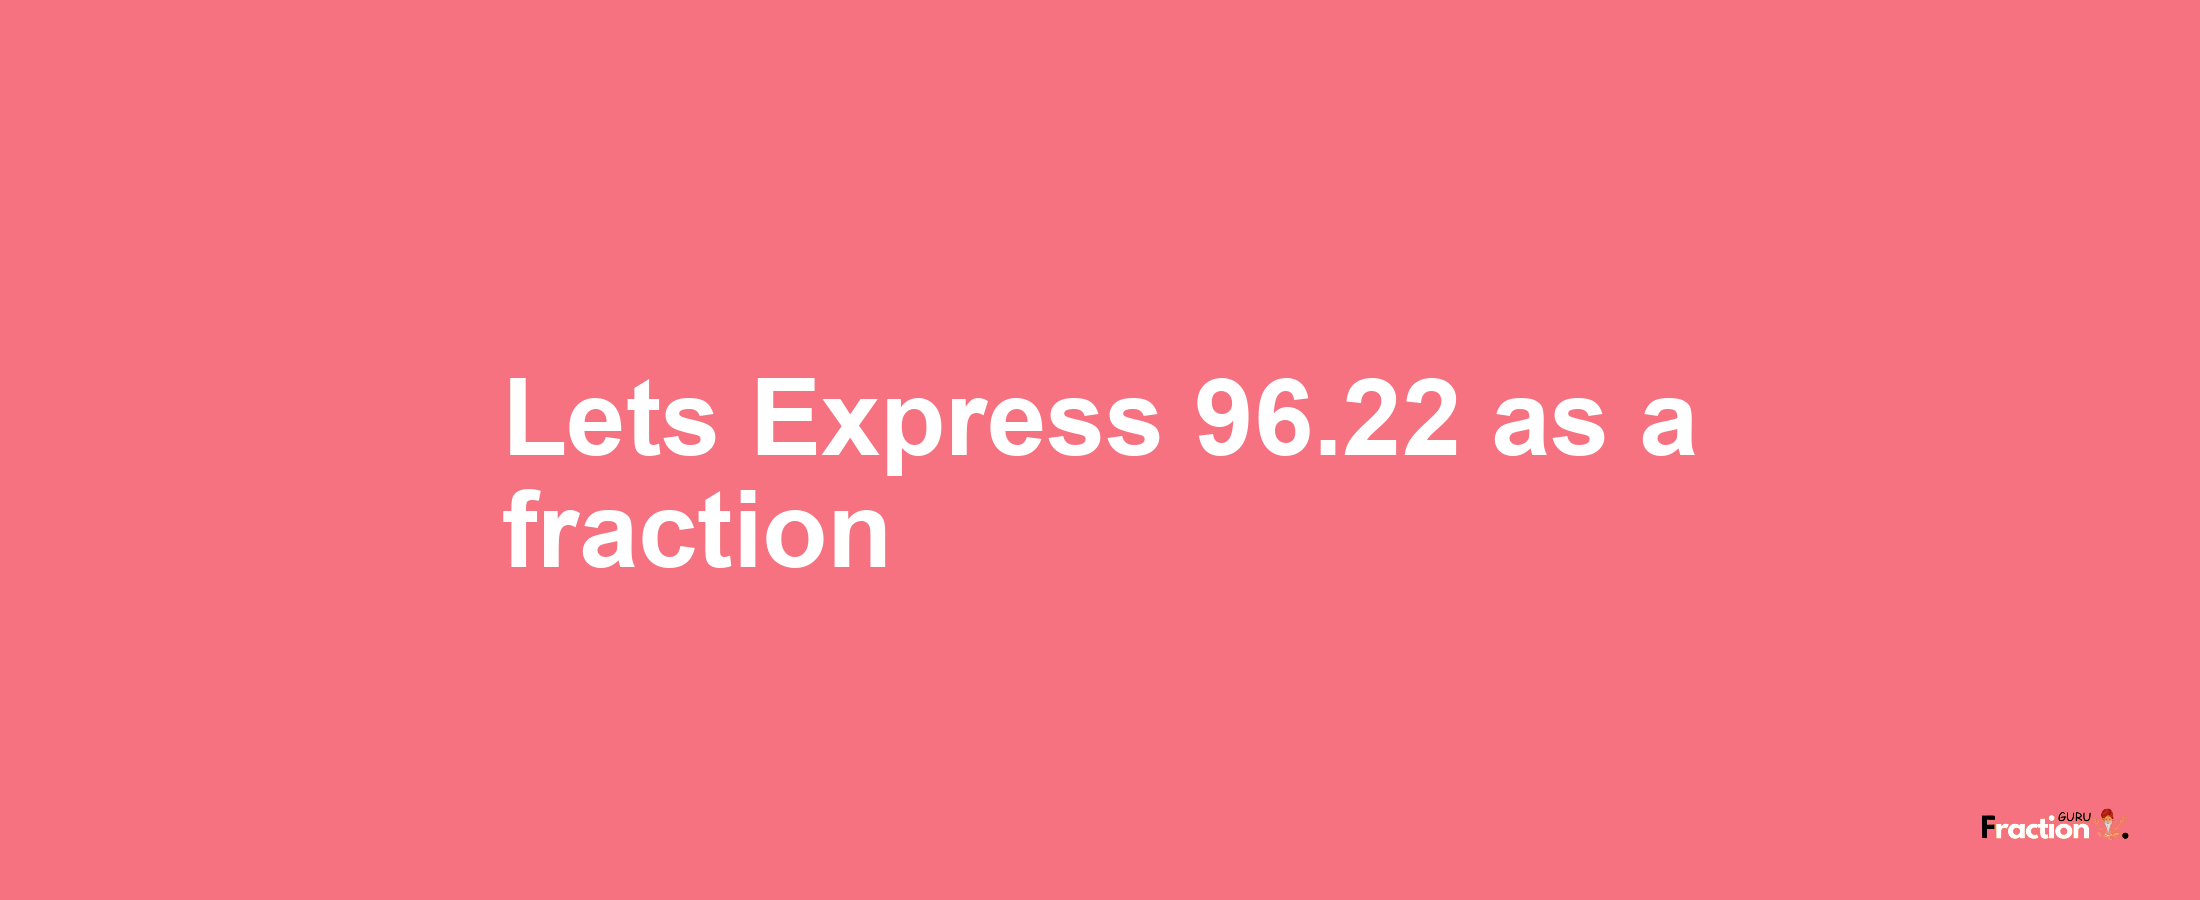 Lets Express 96.22 as afraction